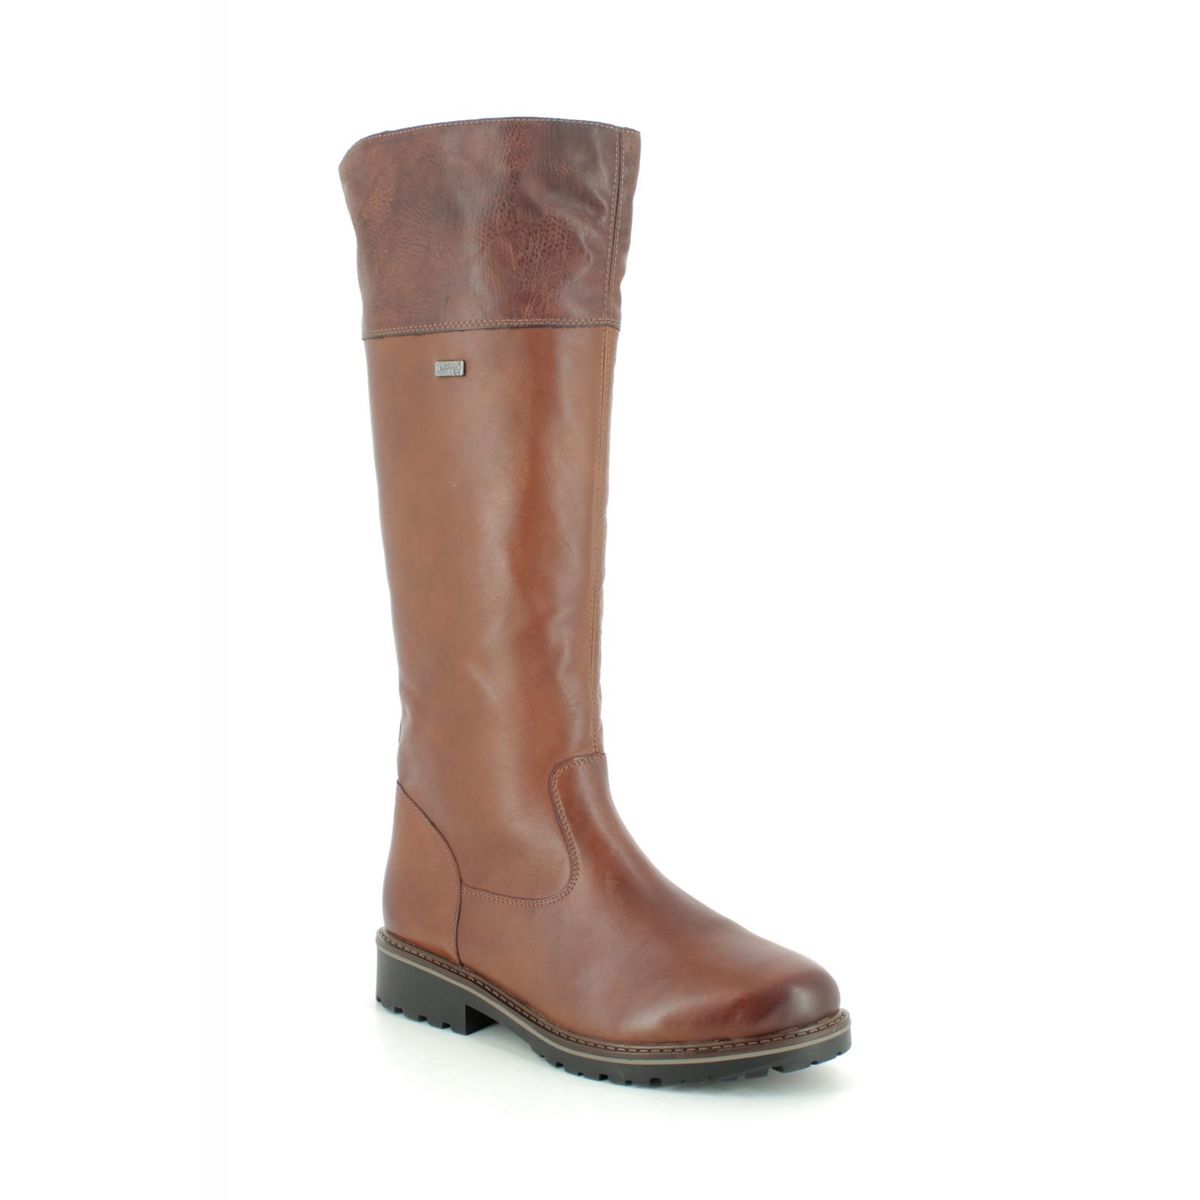 Remonte Indah Tex Tan Leather  Womens Knee-High Boots R6581-22 In Size 38 In Plain Tan Leather